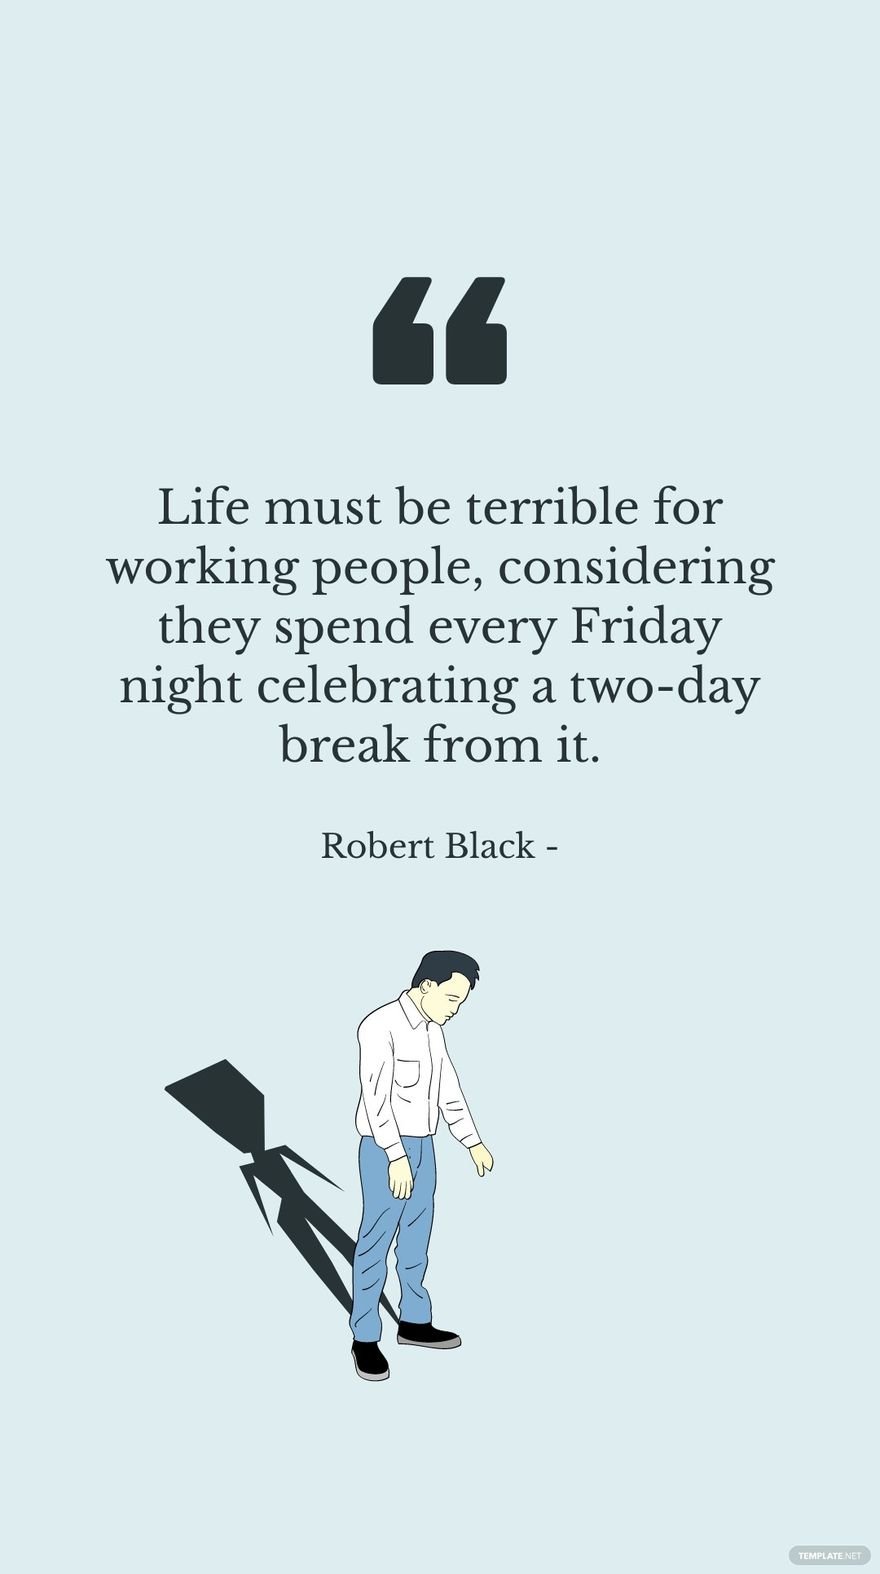 Free Robert Black - Life must be terrible for working people, considering they spend every Friday night celebrating a two-day break from it. in JPG